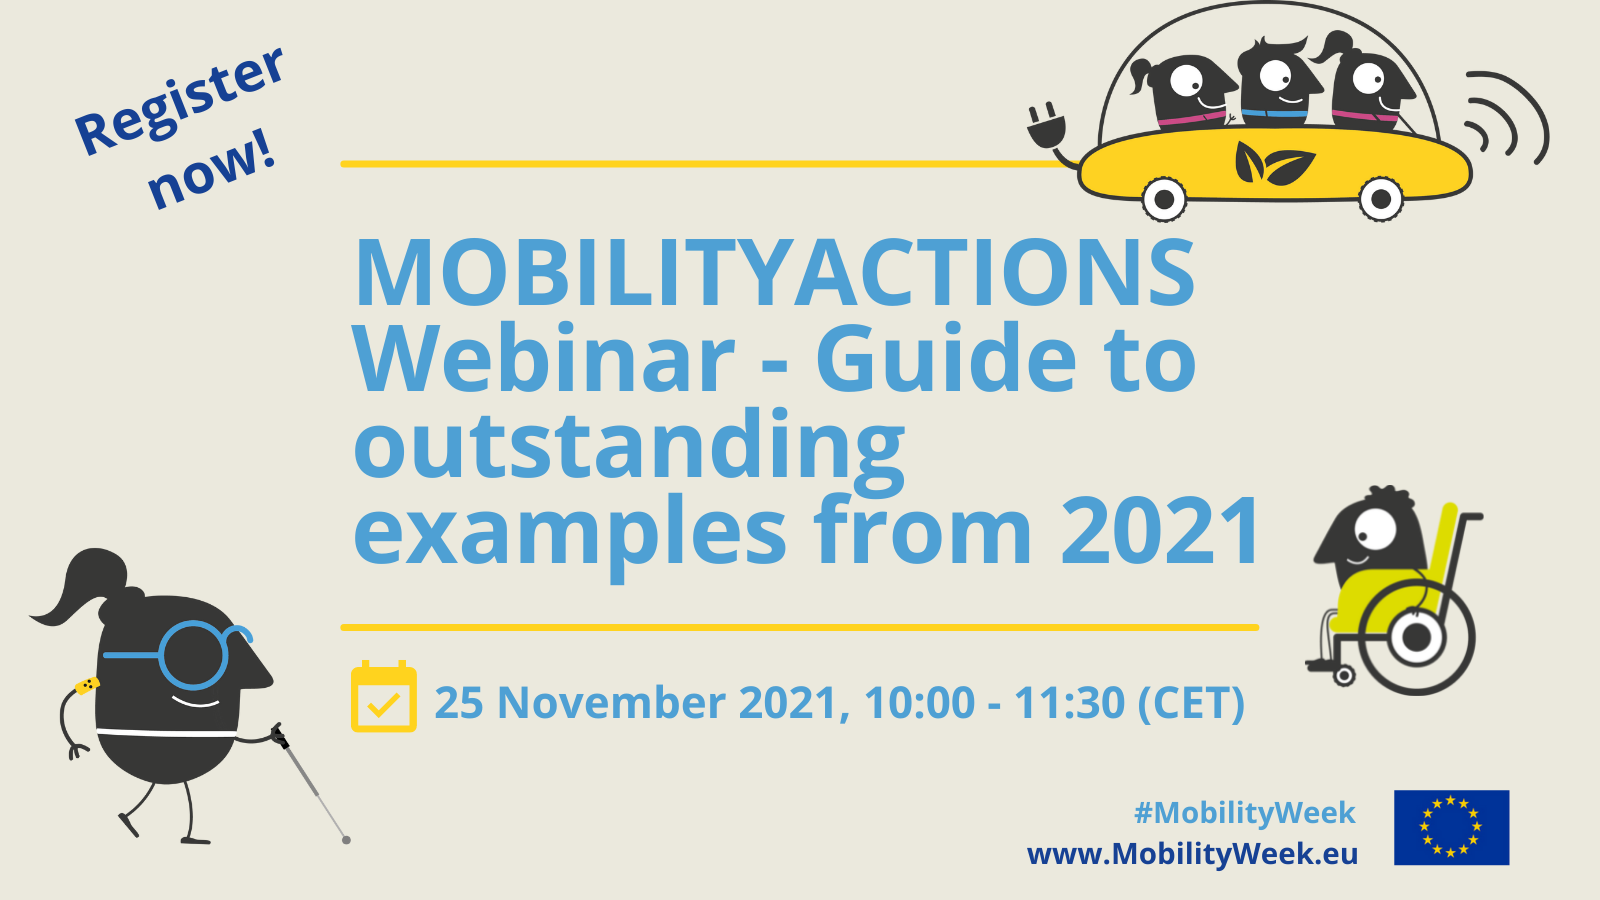 MOBILITYACTIONS Webinar – Guide to outstanding examples from 2021